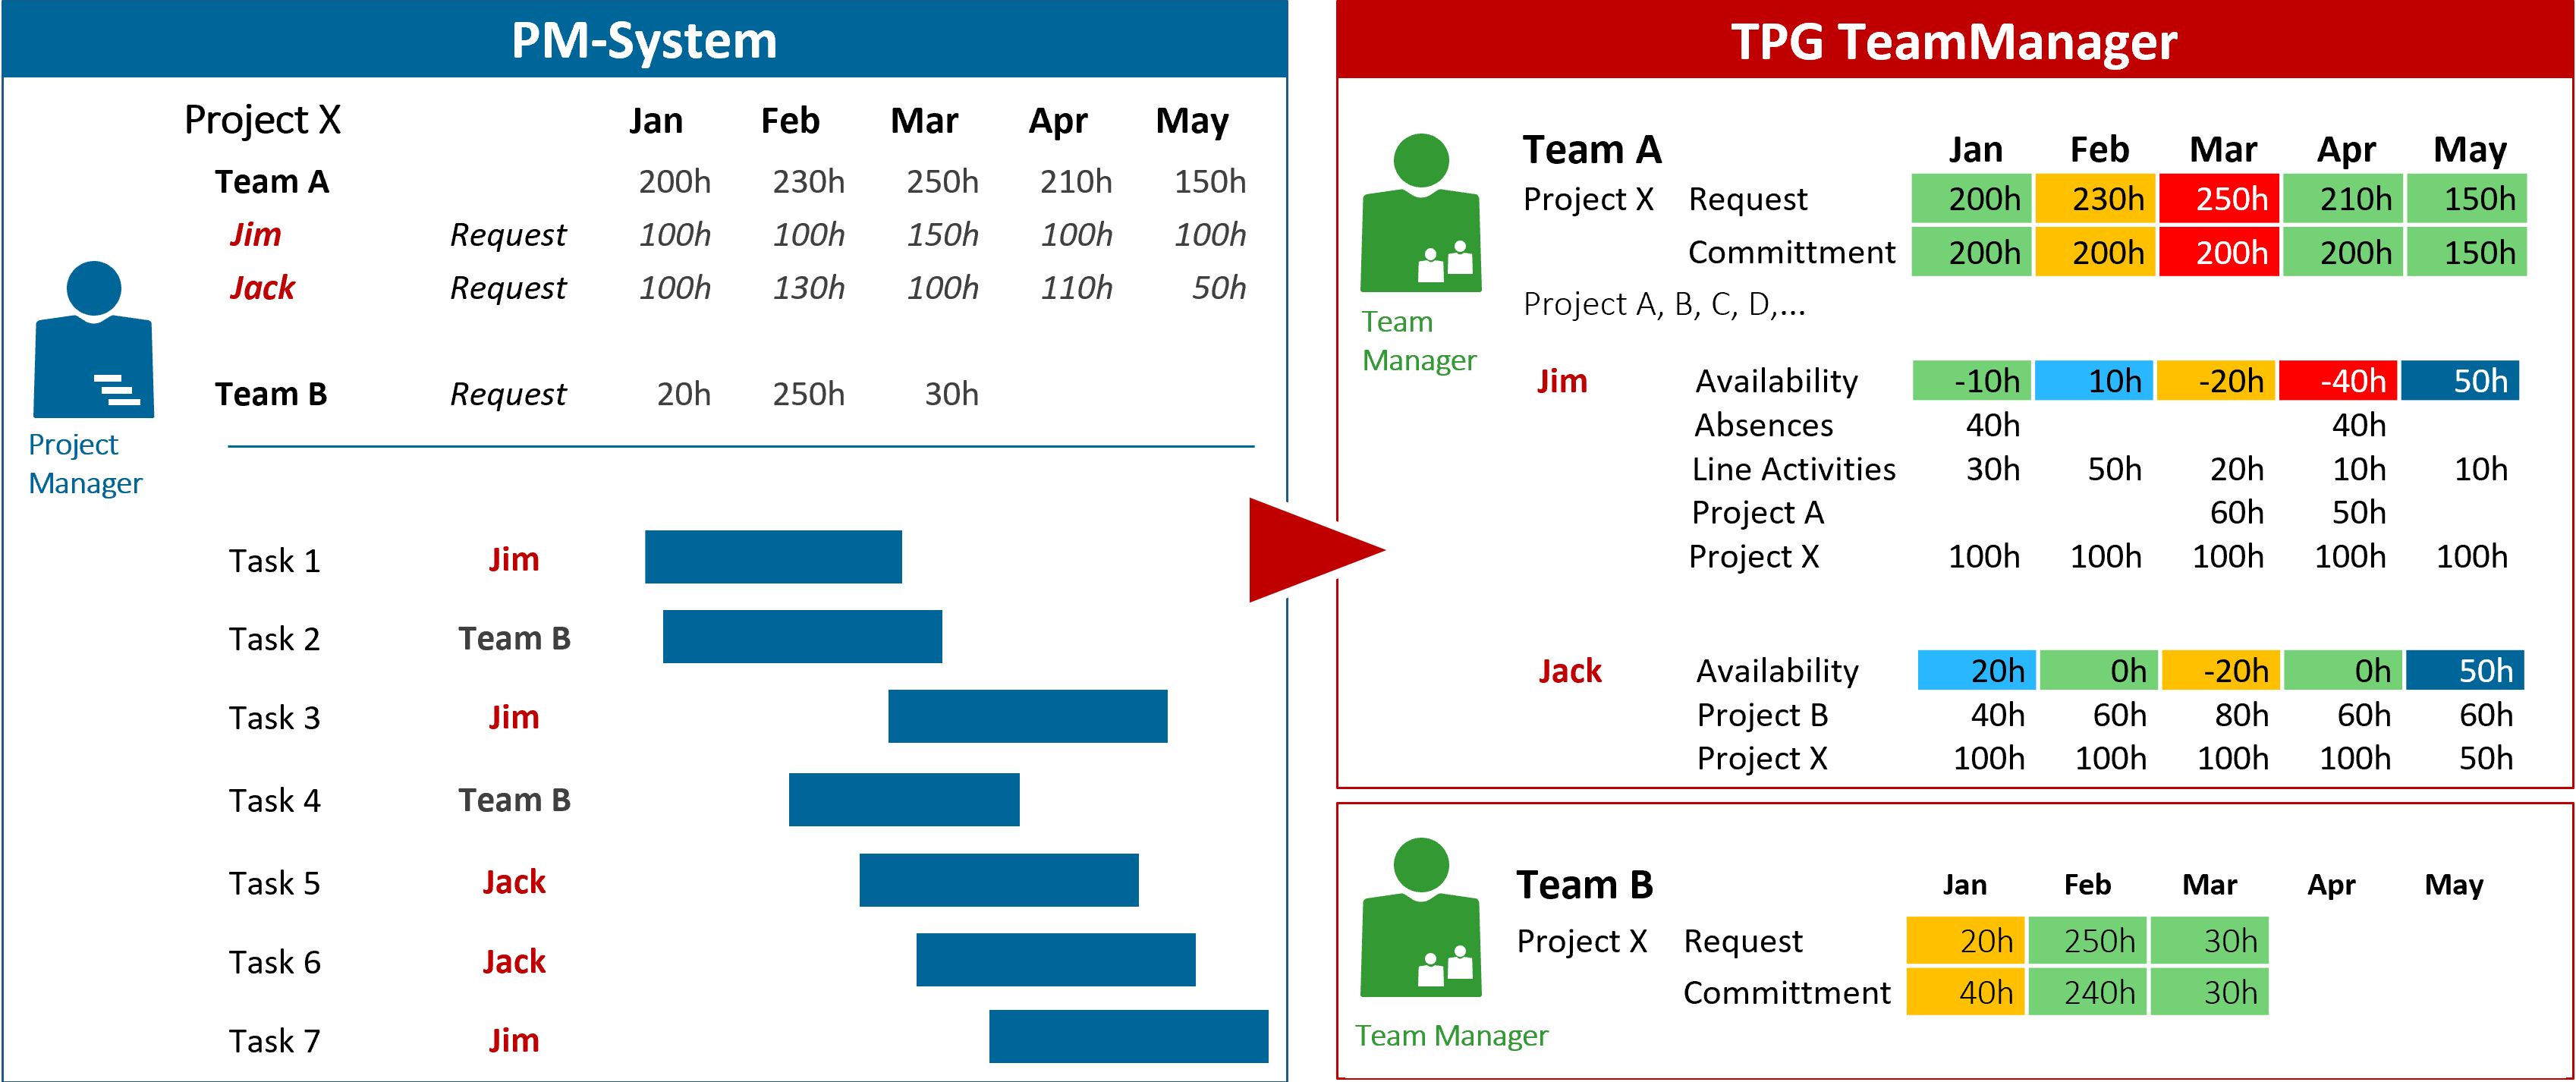 Image: Using TPG TeamManager to commit resources in response to requests from various project management systems